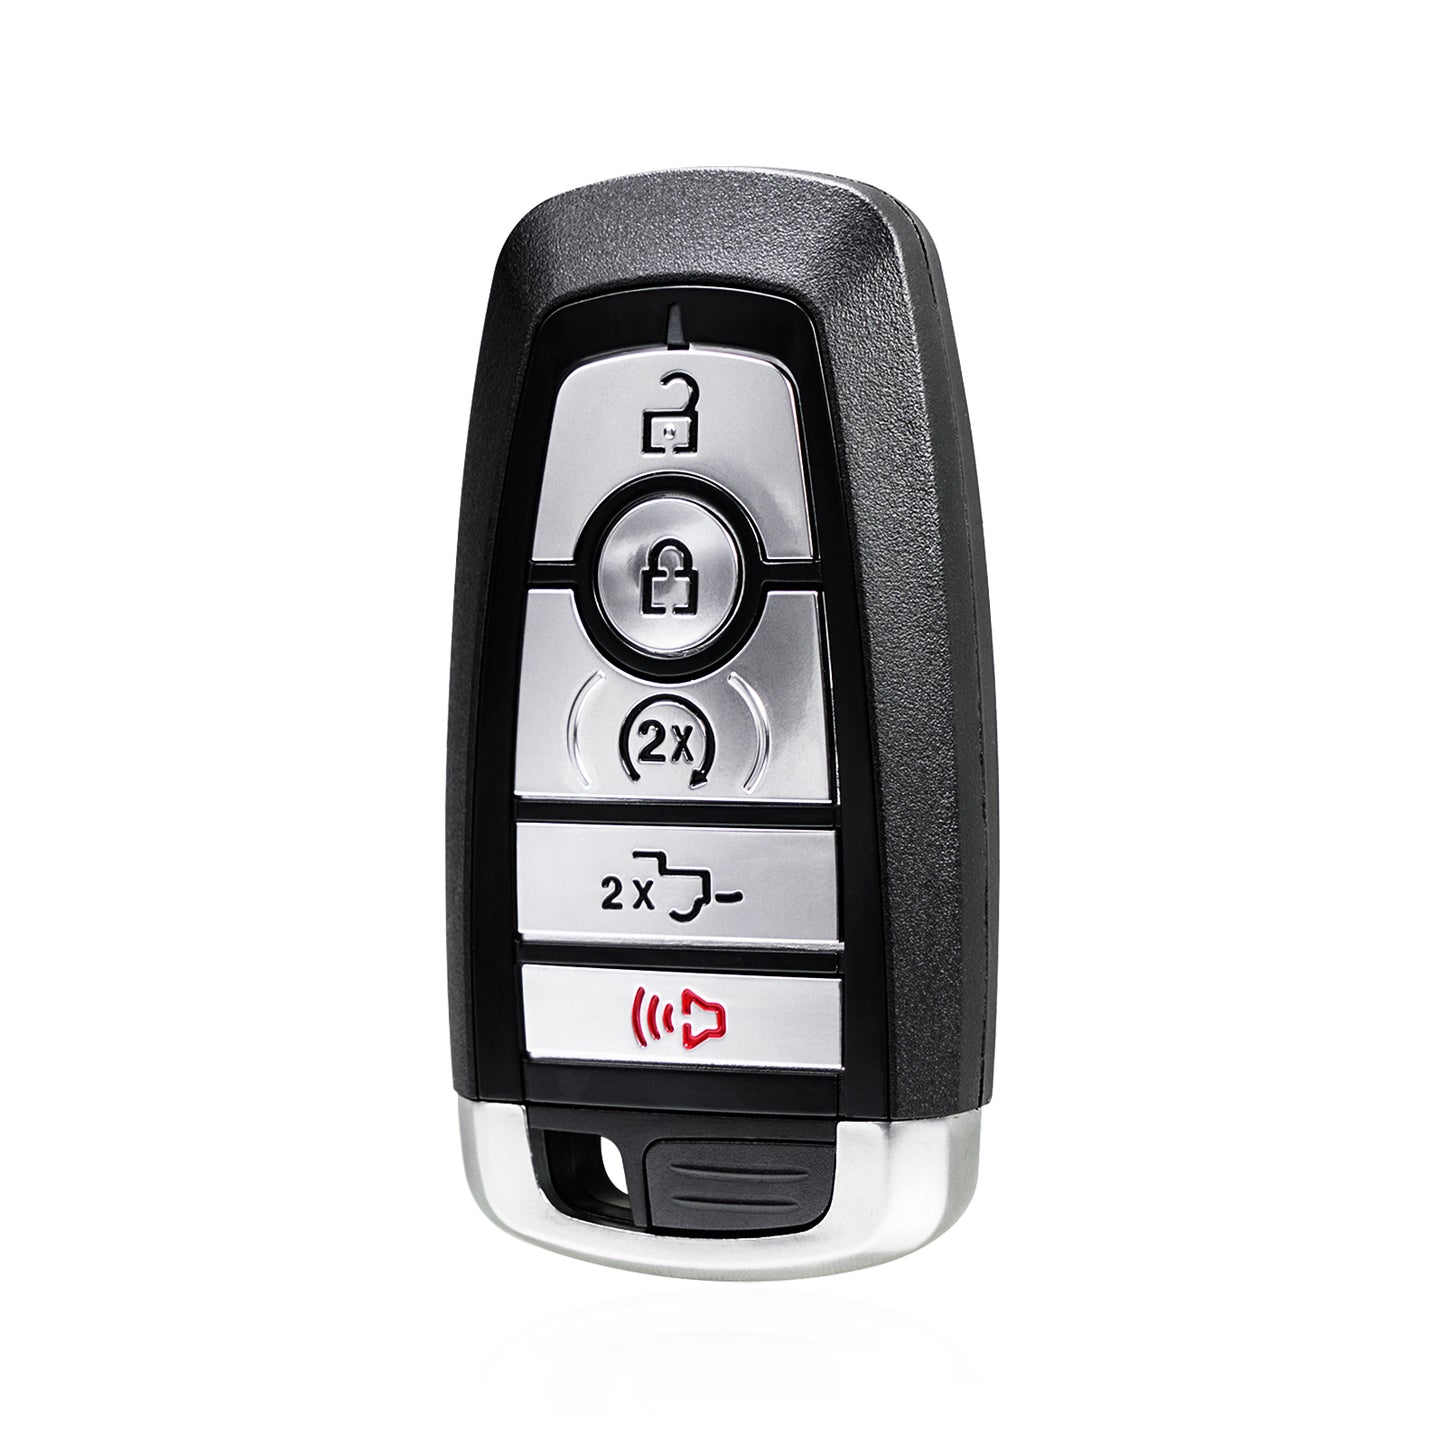 5 Buttons 902MHz Keyless Entry Fob Remote Car Key For 2017 - 2022 Ford F-150 Raptor F-250 F-350 F-450 F-550 FCC ID: M3N-A2C93142600 SKU : J681